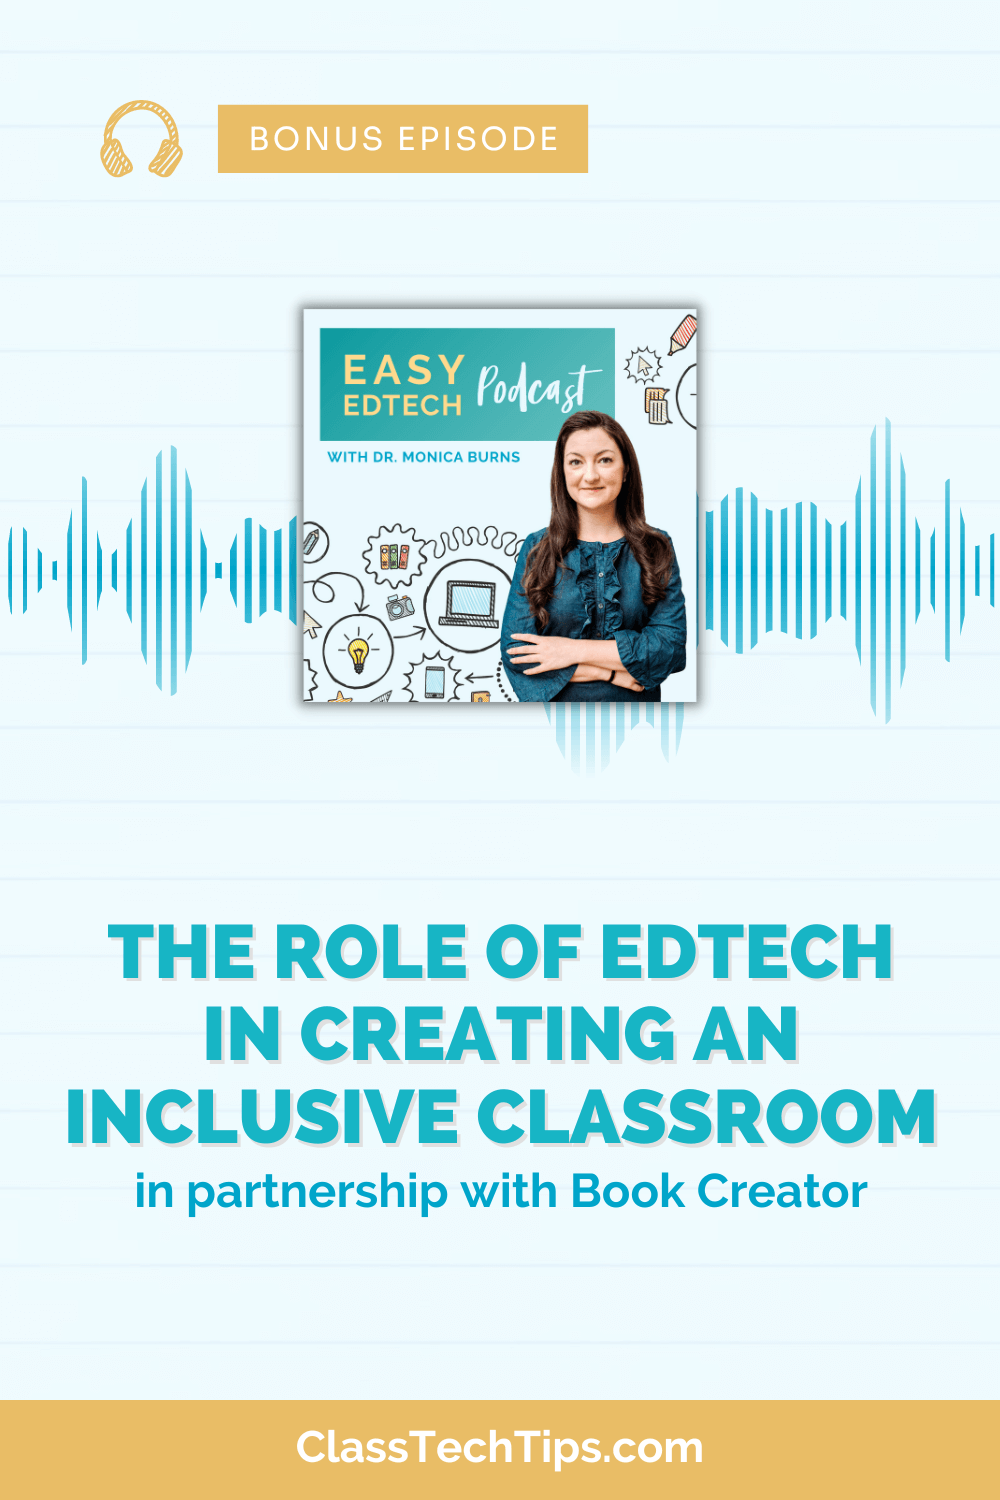 Podcast logo set against a vibrant blue background promoting an episode on creating inclusive classrooms with EdTech and Book Creator CEO, Lainey Franks.